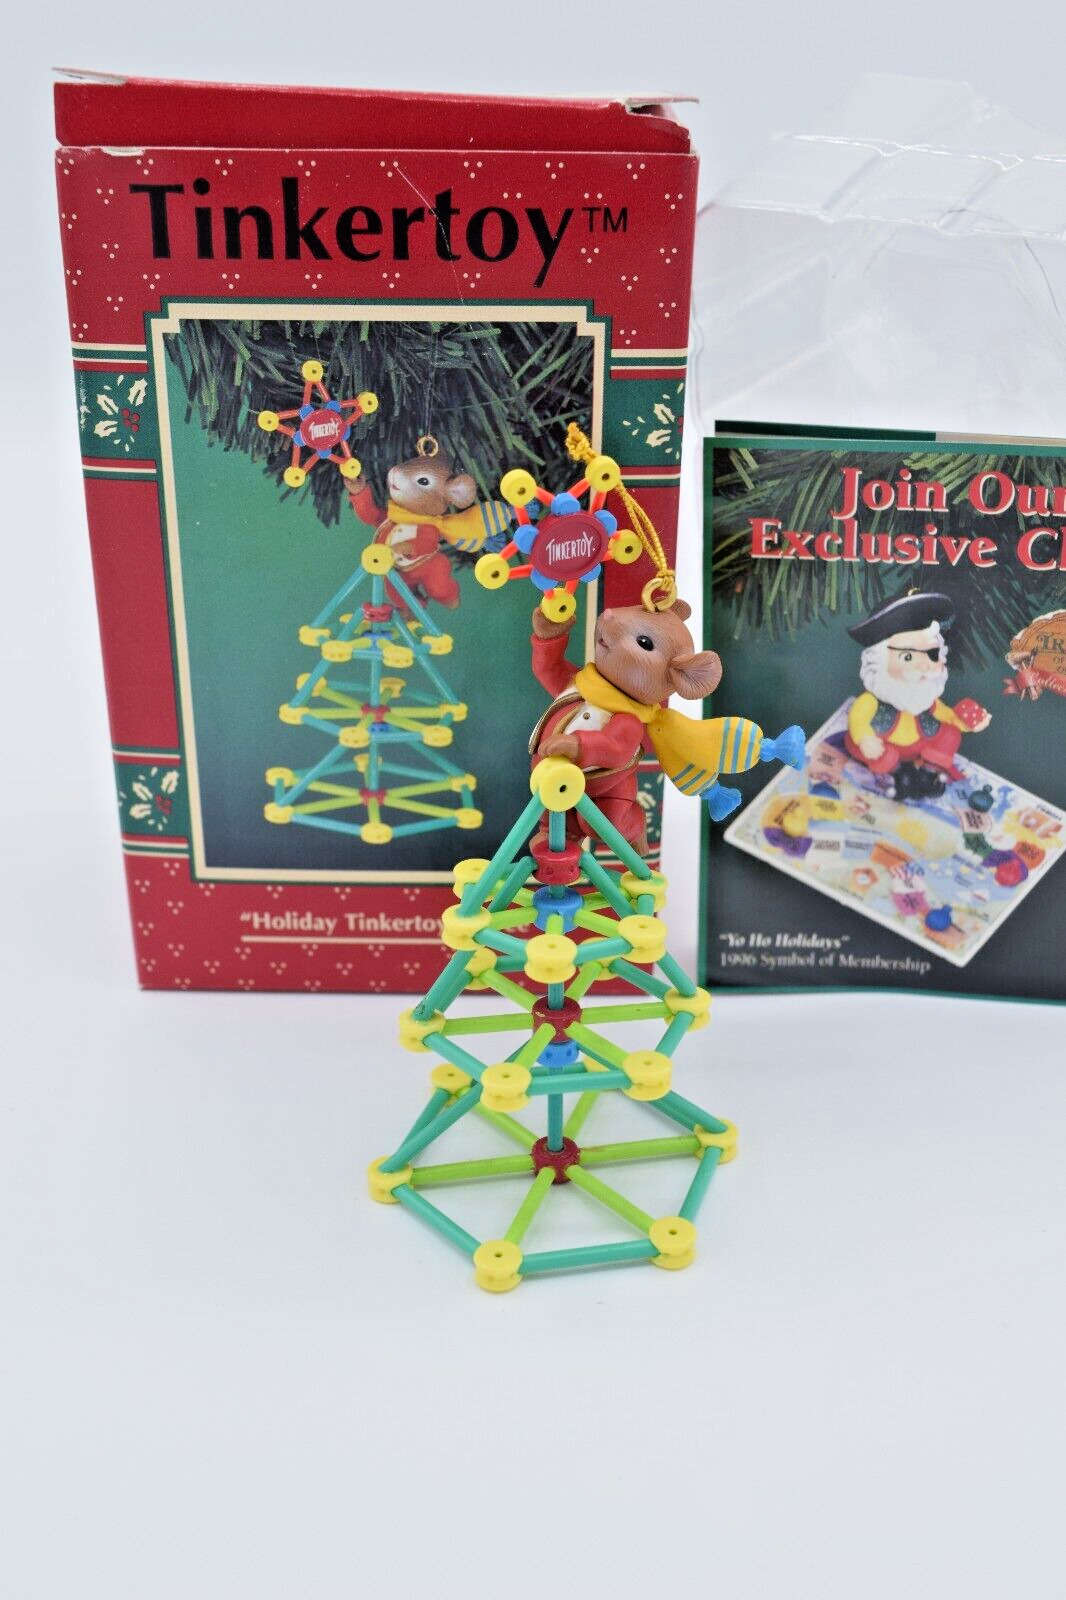 1996 Enesco Holiday Tinkertoy Tree Ornament 166995 in Box Vintage Christmas T7